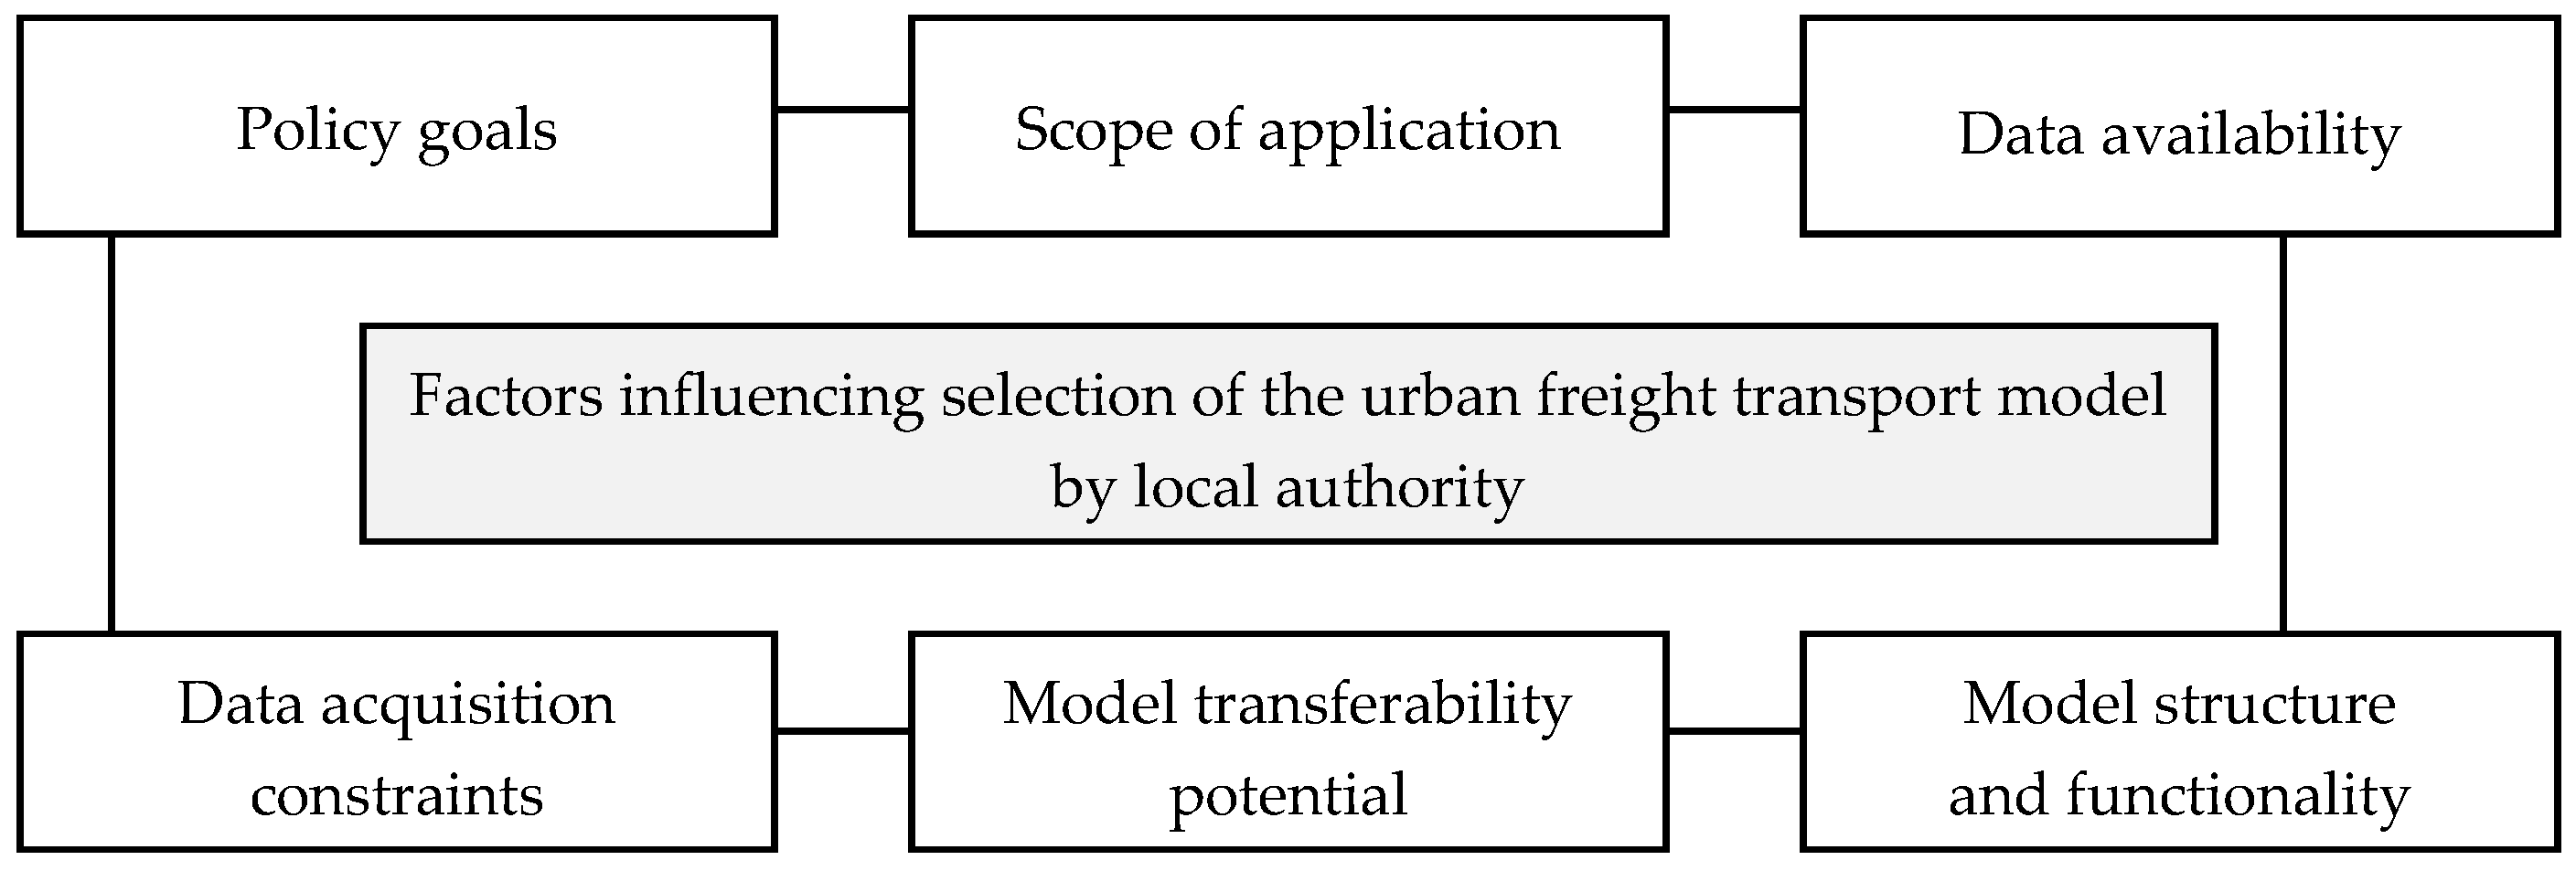 Section 2 - Urban Freight Problems and Strategies, Synthesis of Freight  Research in Urban Transportation Planning